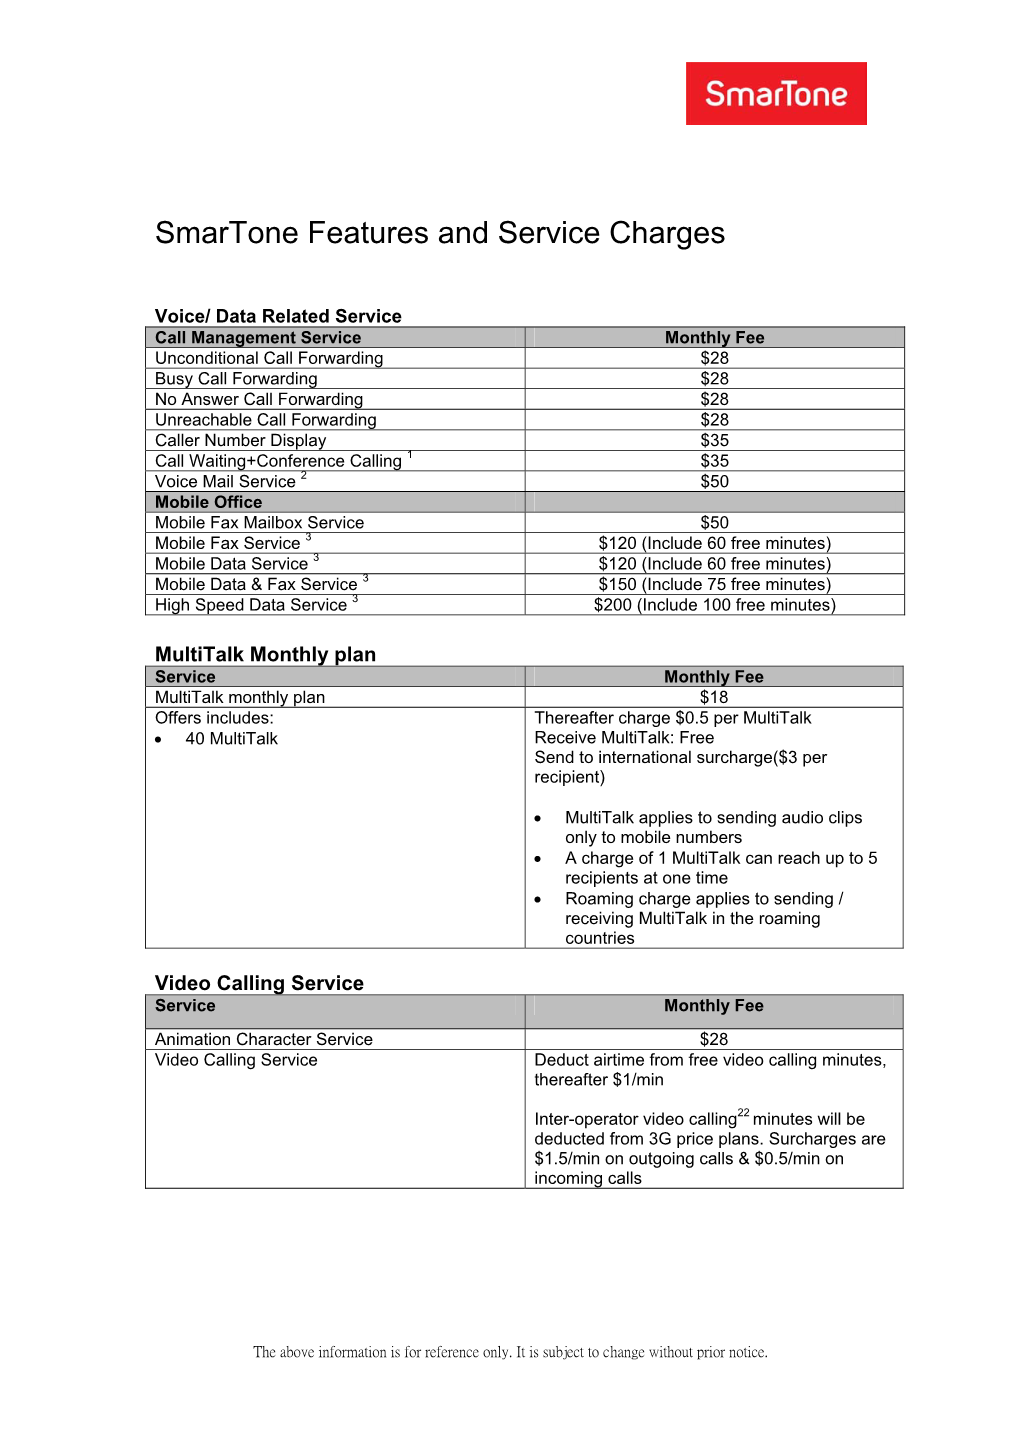 Smartone Features and Service Charges